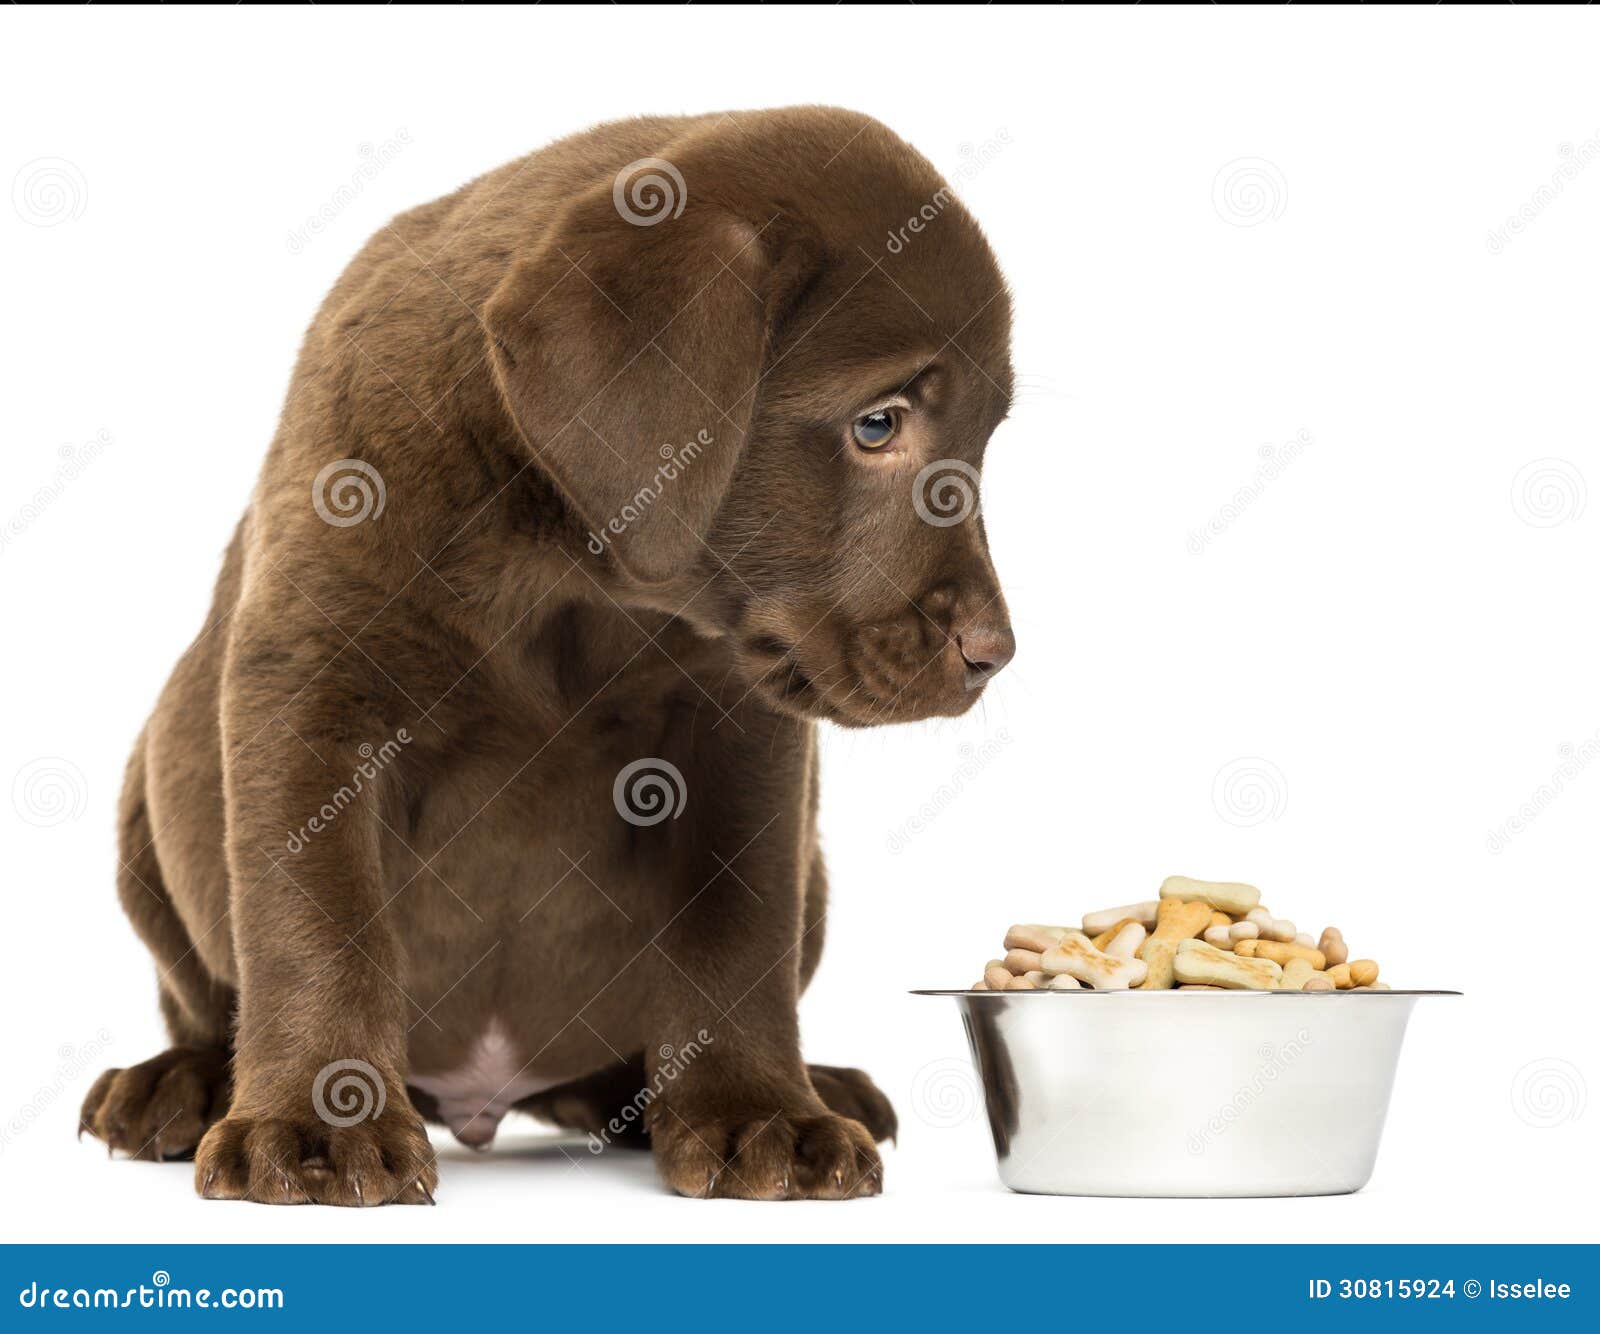  Puppy Sitting With His Full Dog Bowl Stock Images - Image: 30815924